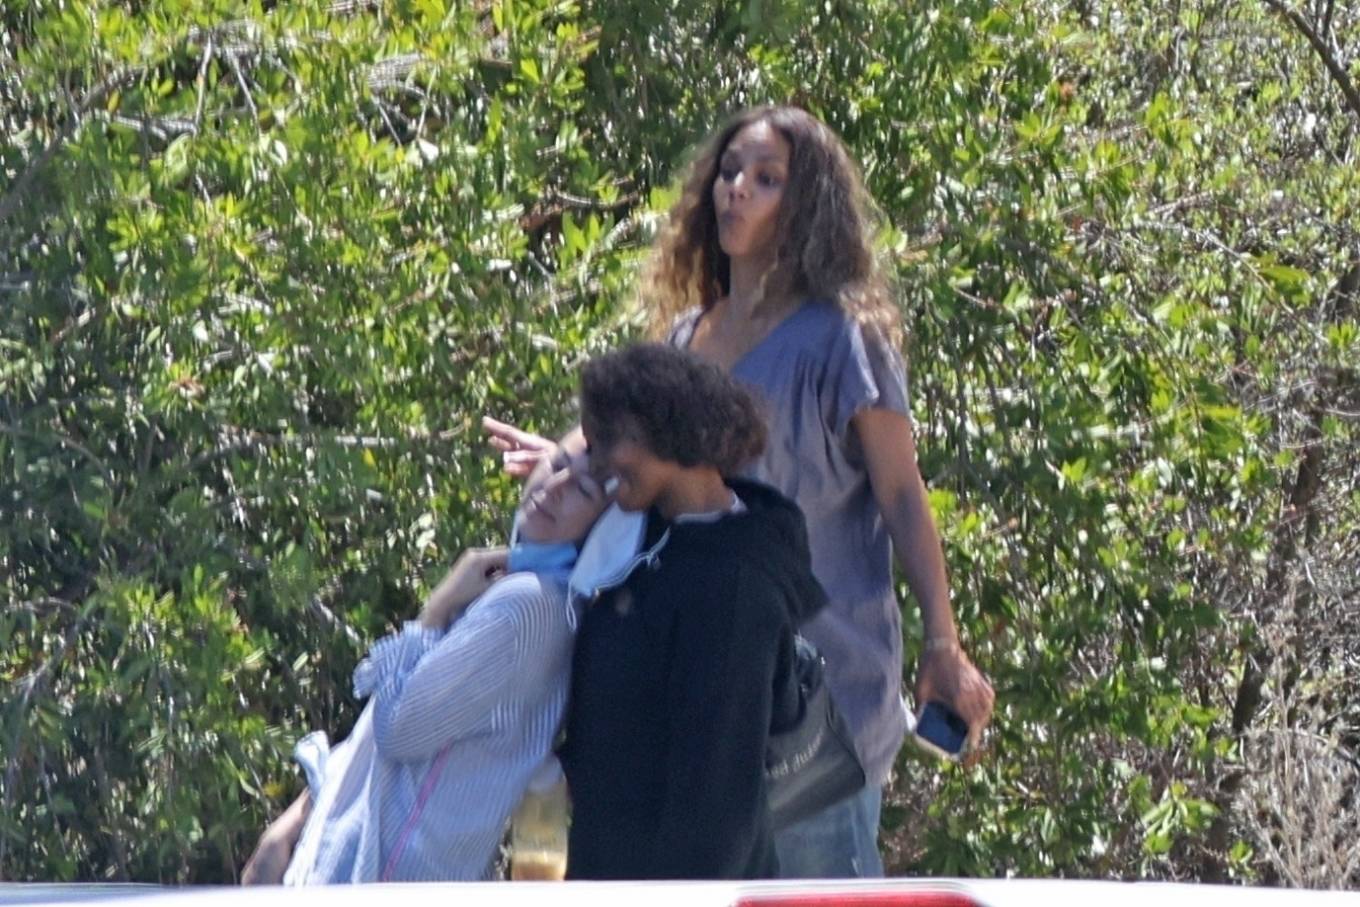 Halle Berry 2021 : Halle Berry -Seen filming a commercial for Sweaty Betty workout clothes in Malibu -02